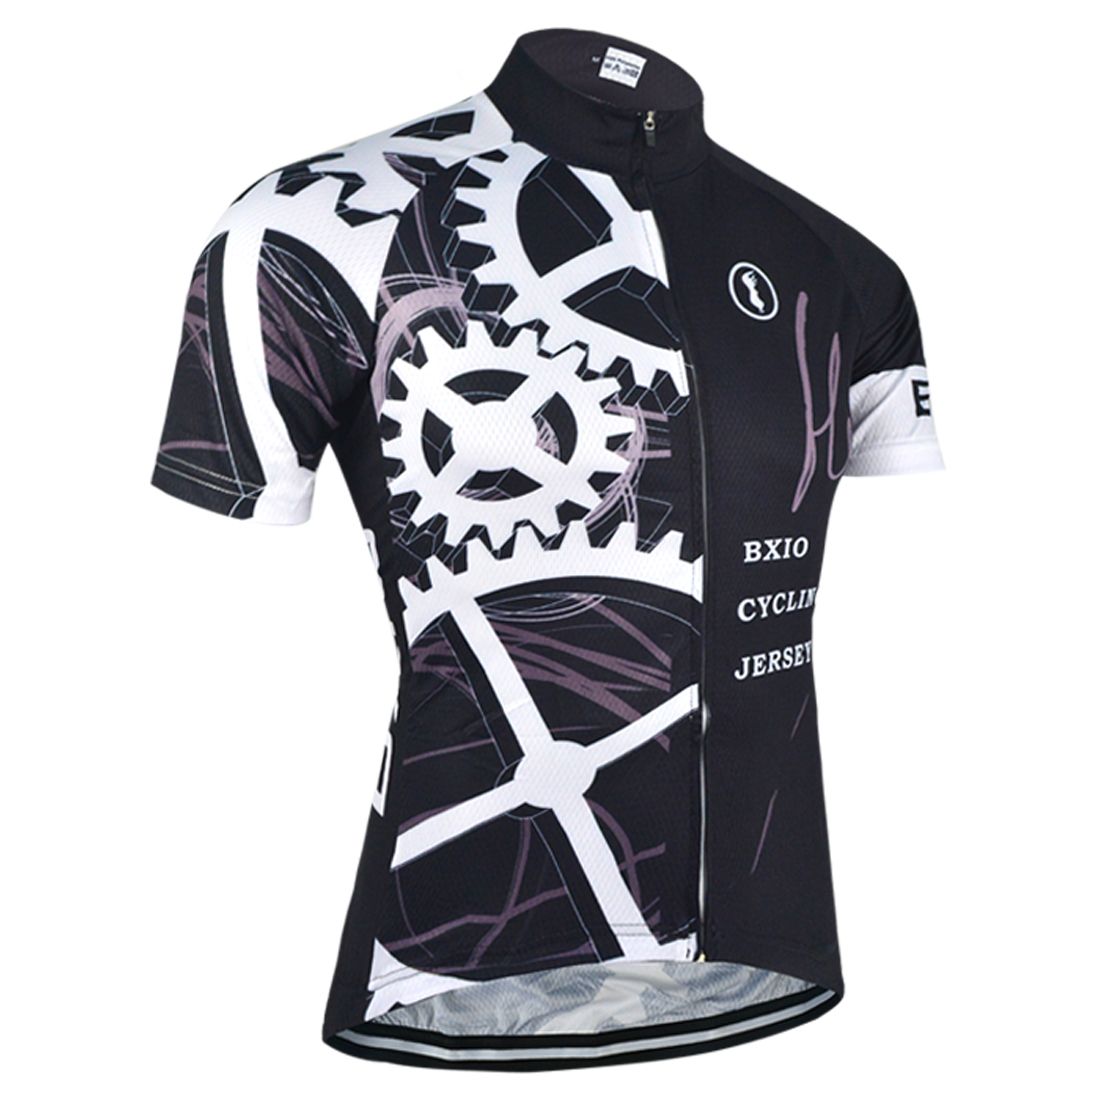 Bxio Latest Design Cycling Shirts Gear Printing Bikes Clothes Tops with regard to Cycling Shirts